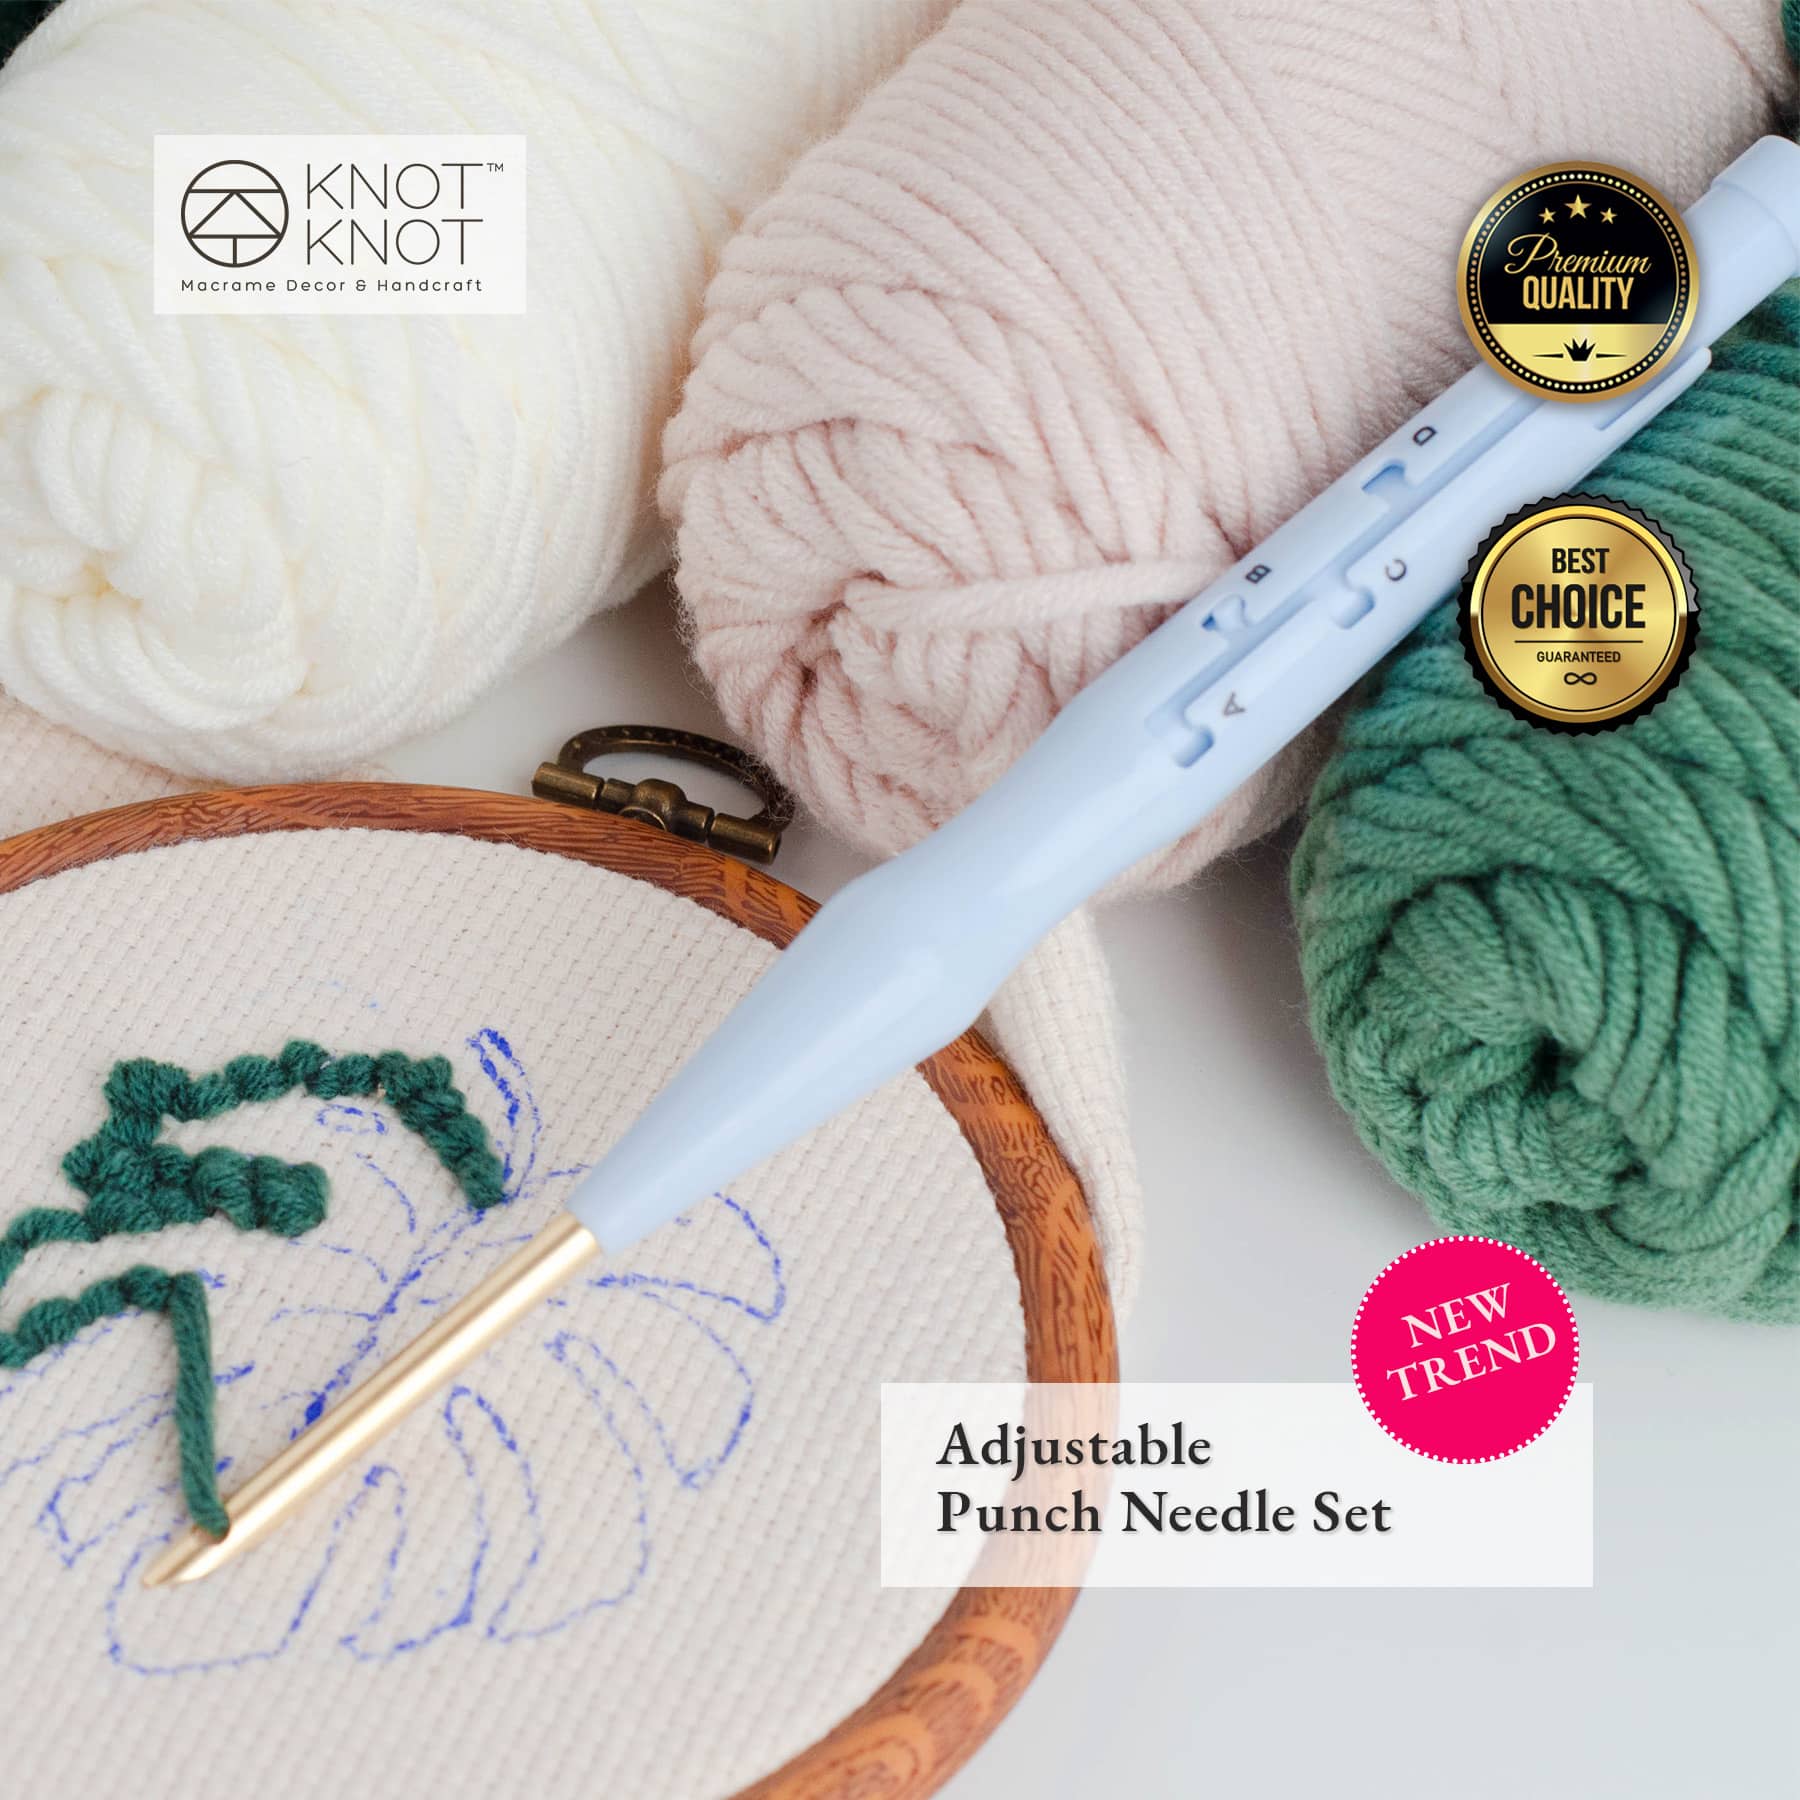 SKC] High Quality Adjustable Punch Needle Embroidery Rug Yarn Craft 戳戳秀 -  Knot Knot Macrame